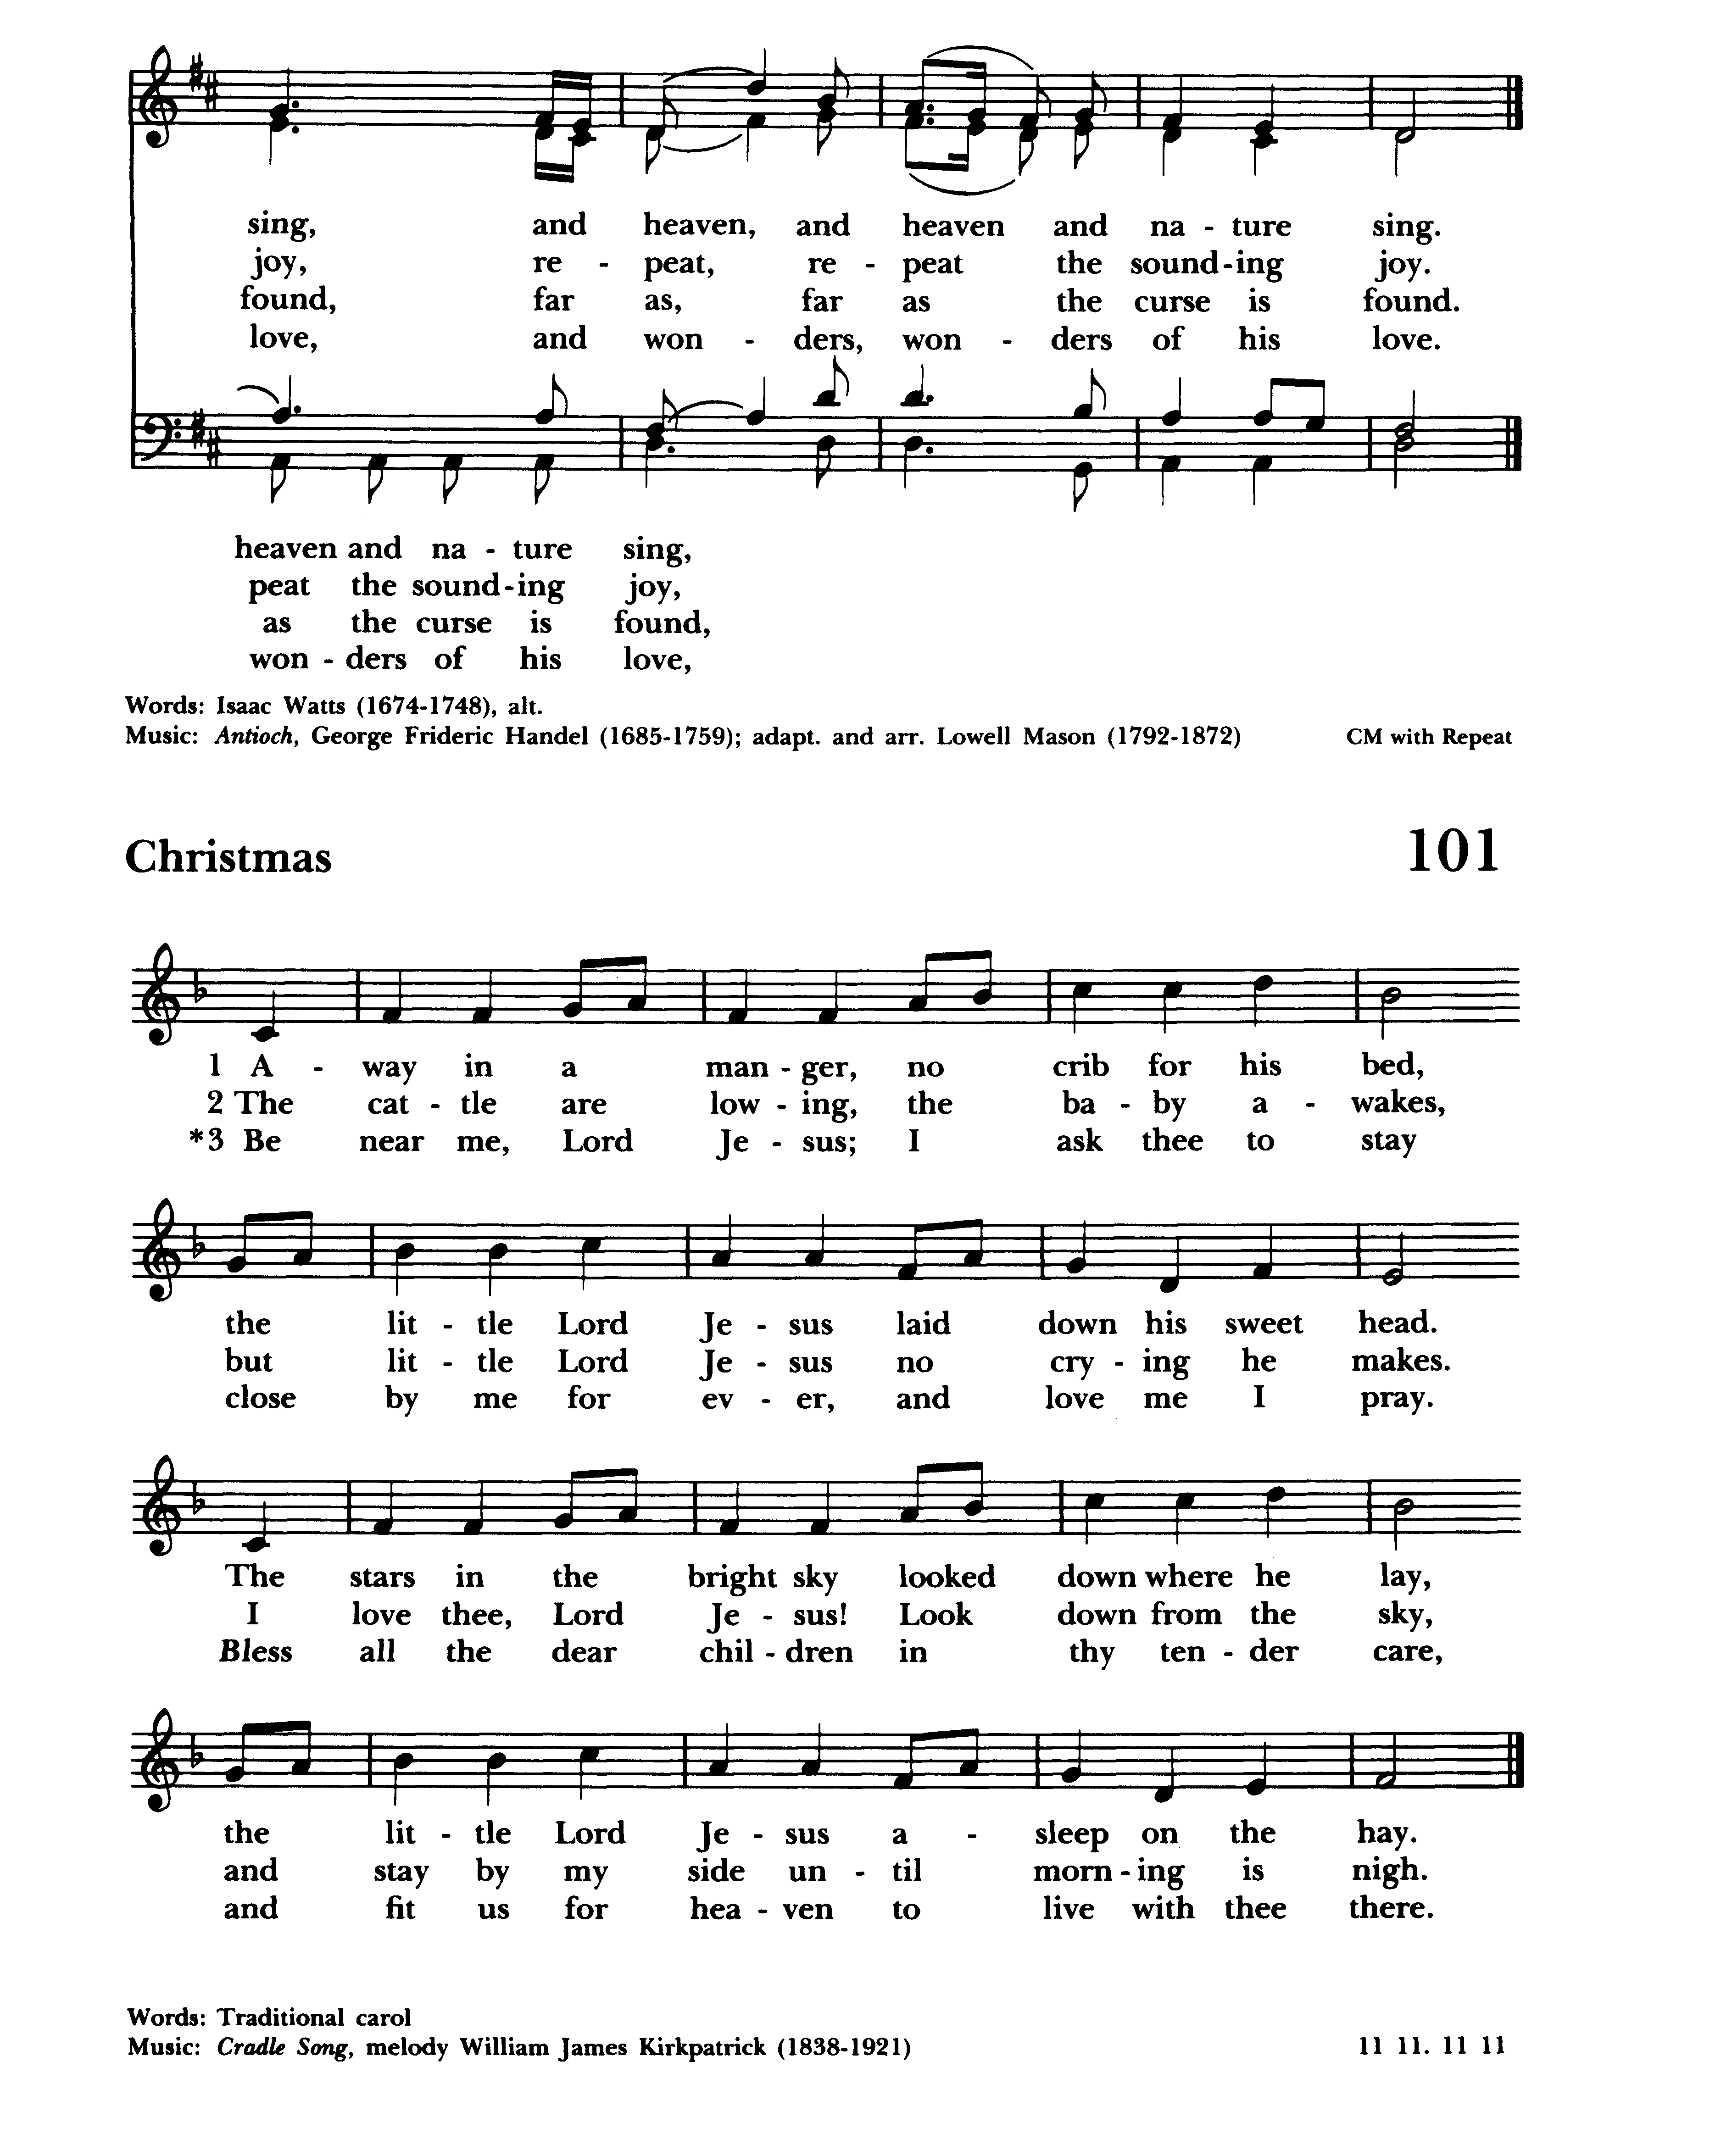 Page Scan from Hymnary.org.